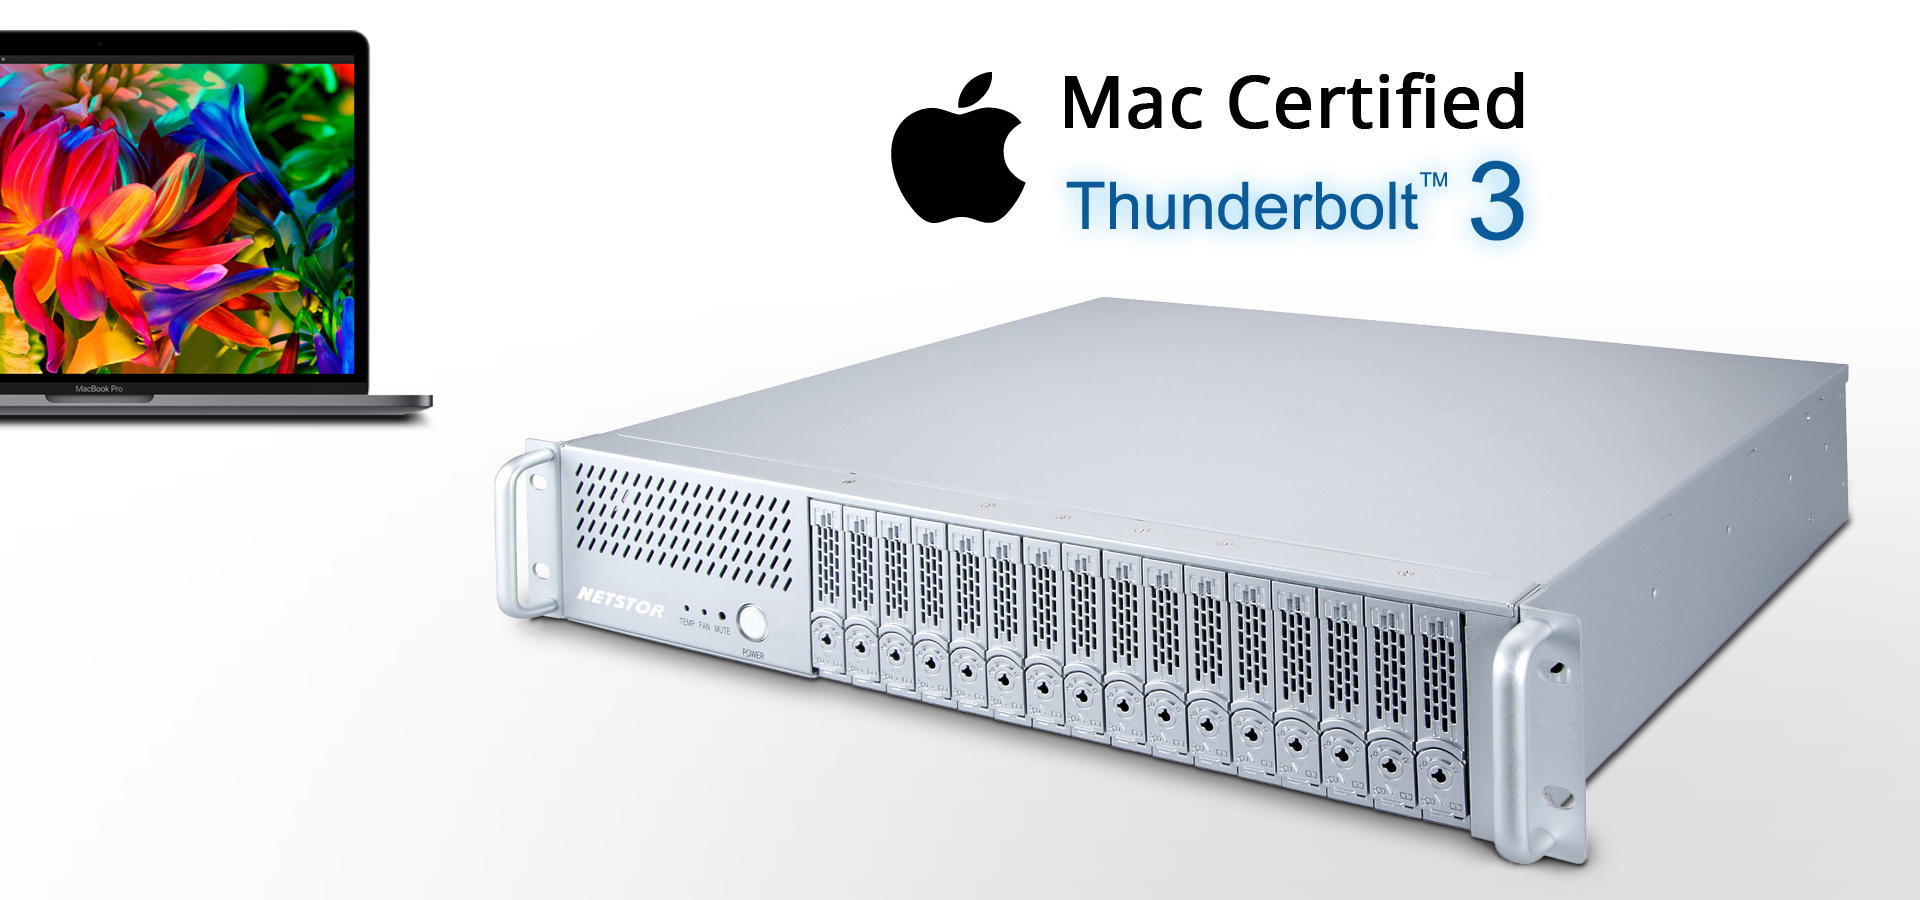 Netstor NA338TB3 has passed Apple certification test process and is Mac certified.